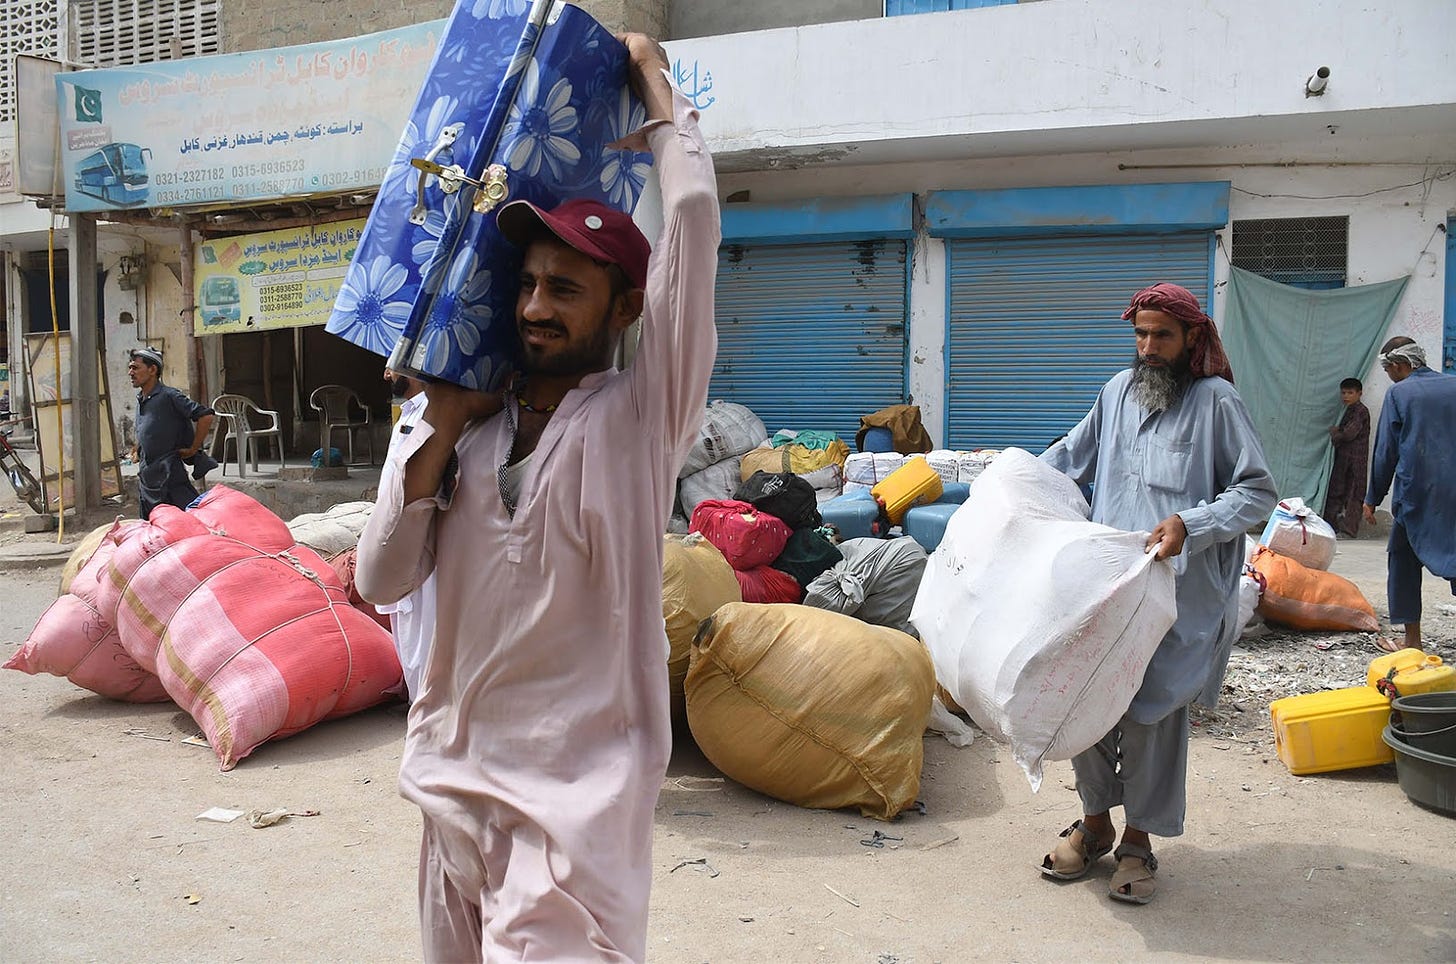 Pictured are two Afghan refugees carrying packaged, one carries a blue luggage over his shoulder and another a white sack. They are outside of a building to leave the Pakistani port city of Karachi and return to Afghanistan following the Pakistani government's decision to deport those illegally staying in the country, in Karachi, Pakistan on October 06, 2023.